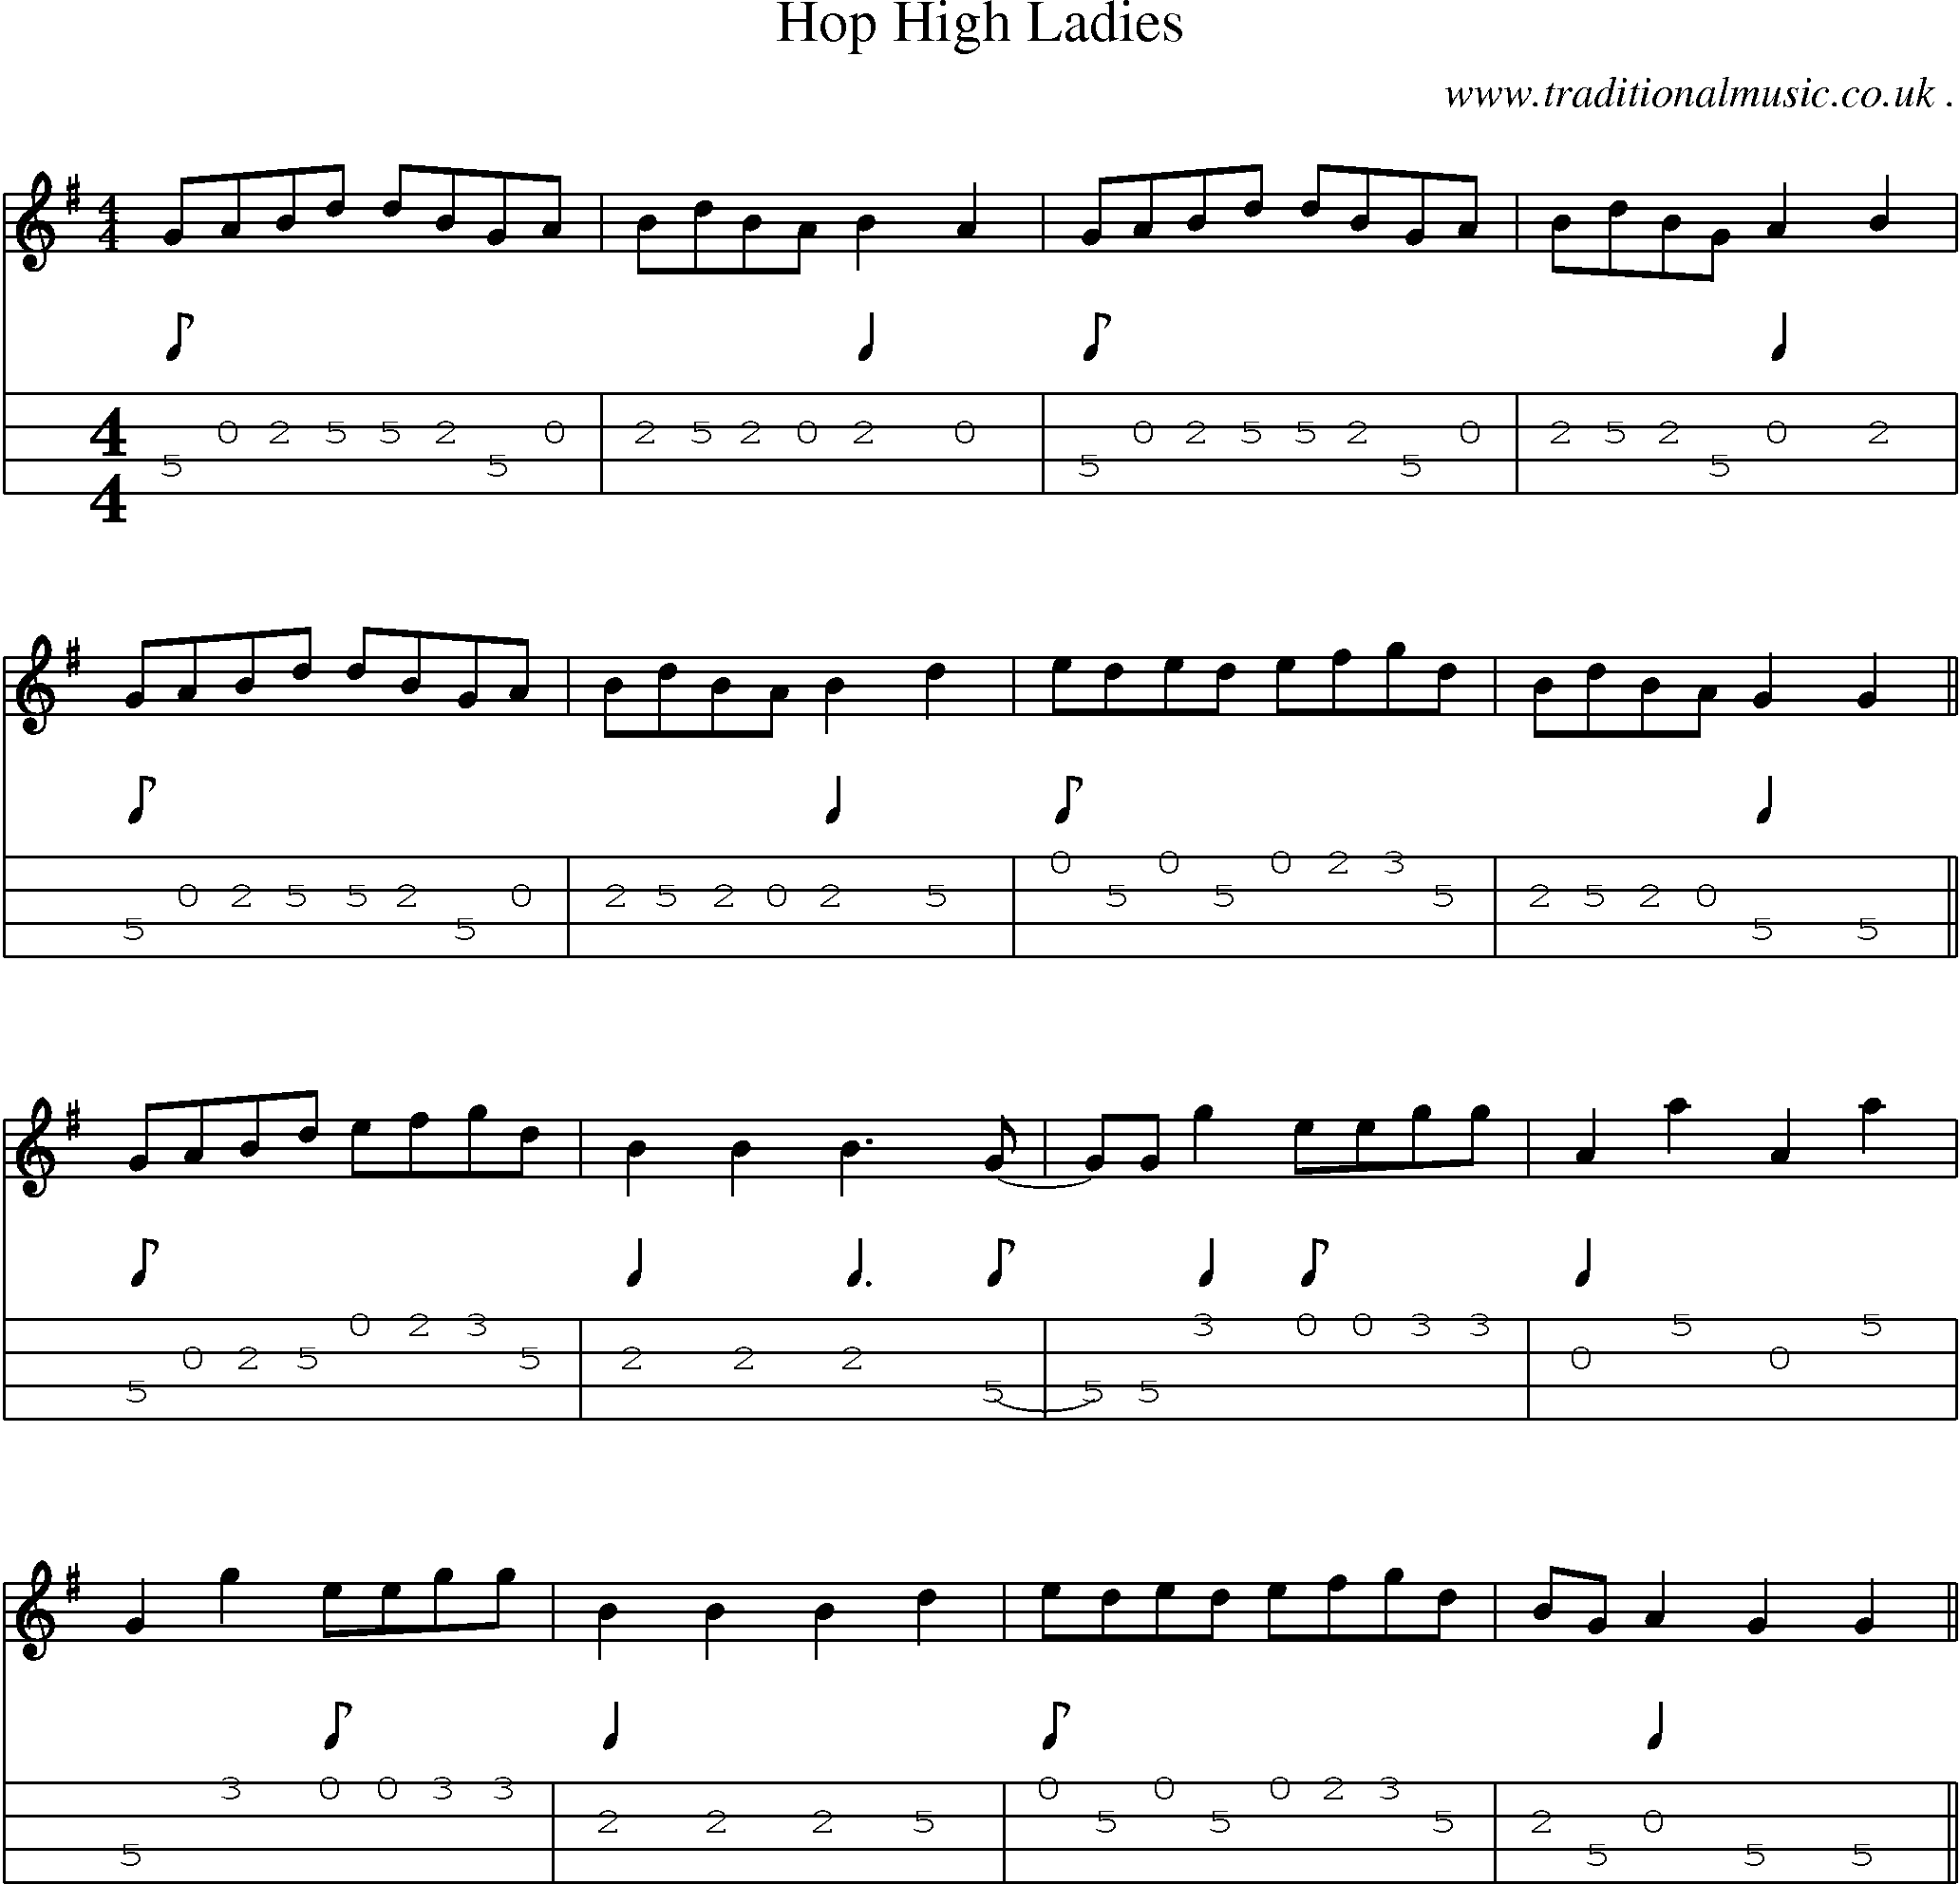 Music Score and Guitar Tabs for Hop High Ladies